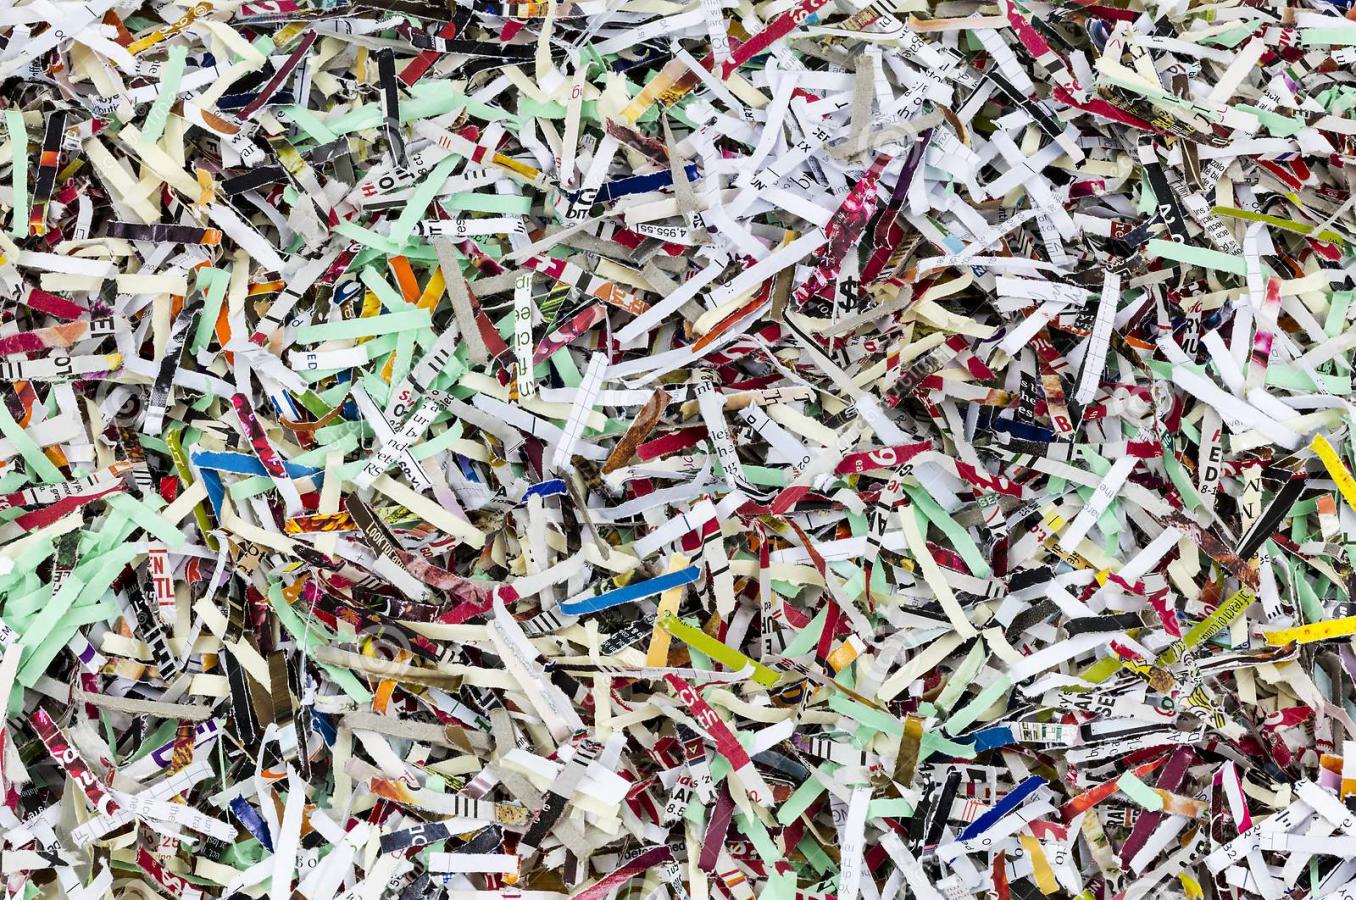 Adirondack Regional Federal FCU provides free document shredded on certain scheduled days of the year.